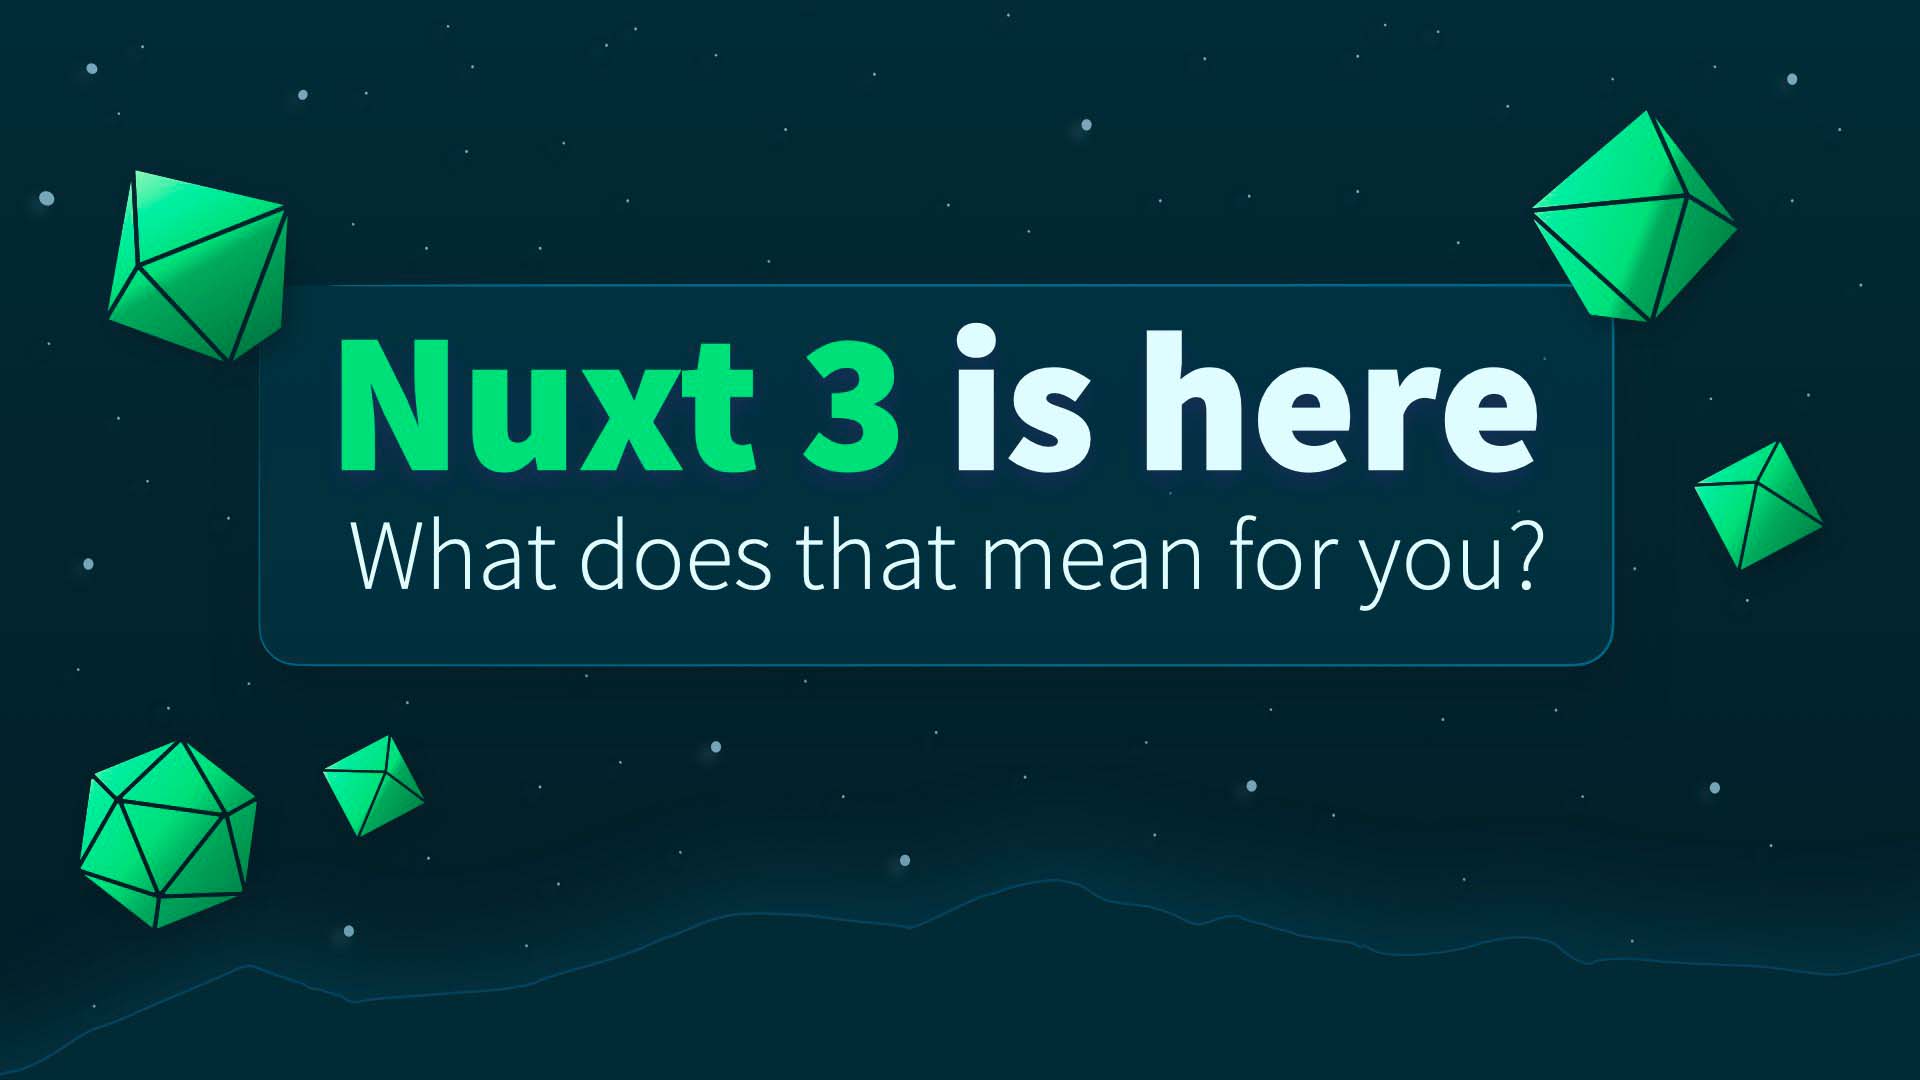 Nuxt 3 is here! What does that mean for you?